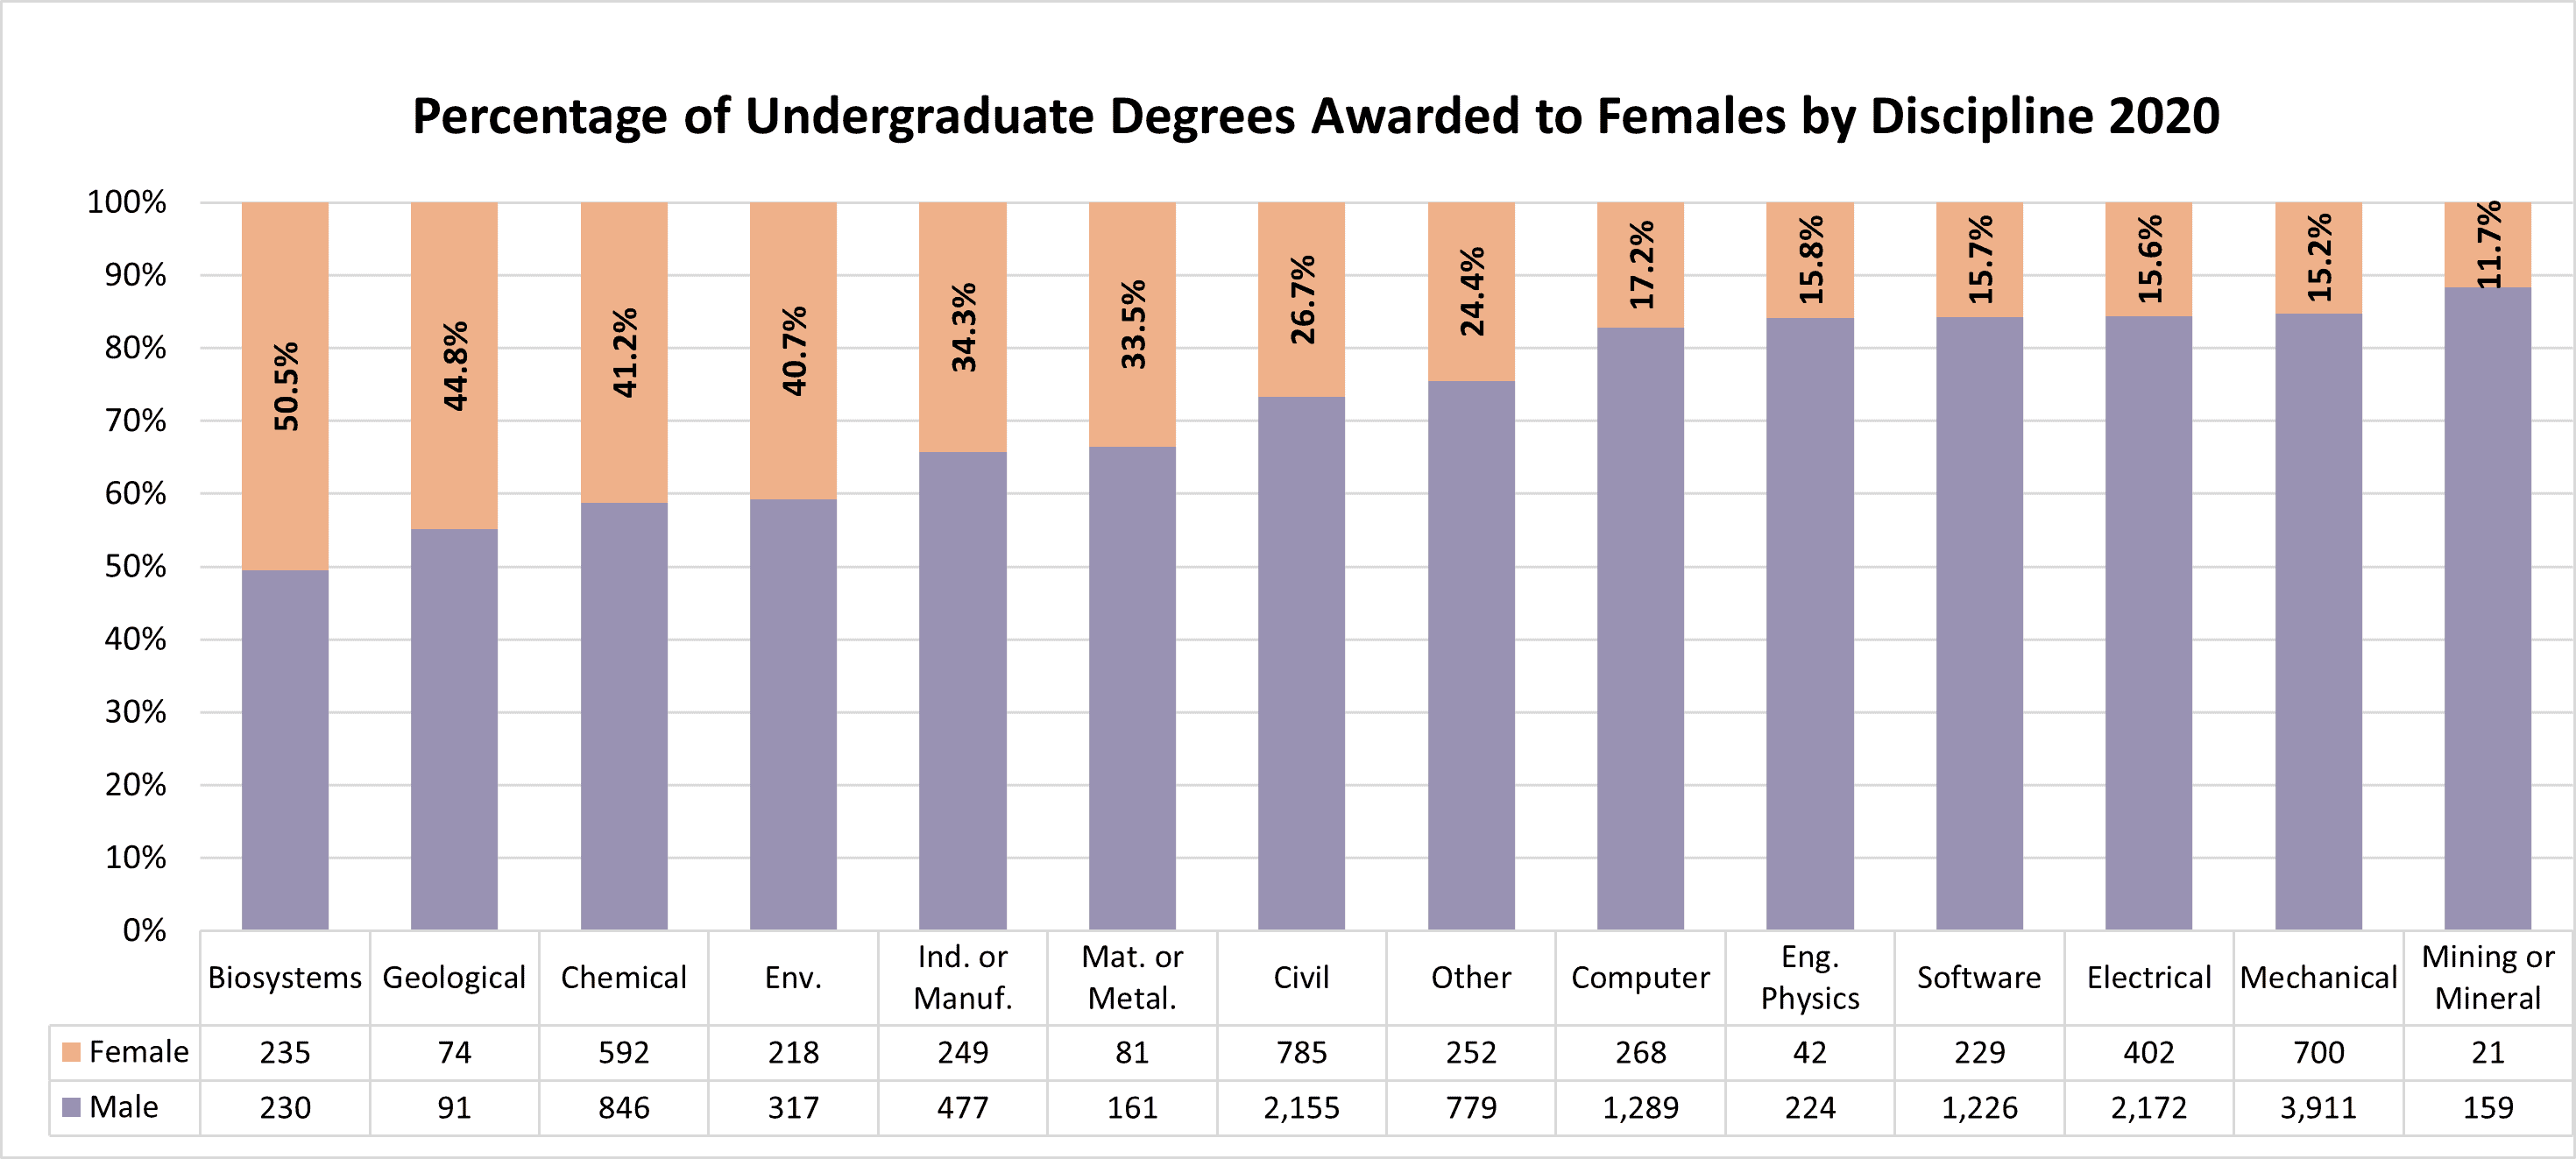 Percentage of undergraduate degrees awarded to females by discipline 2020